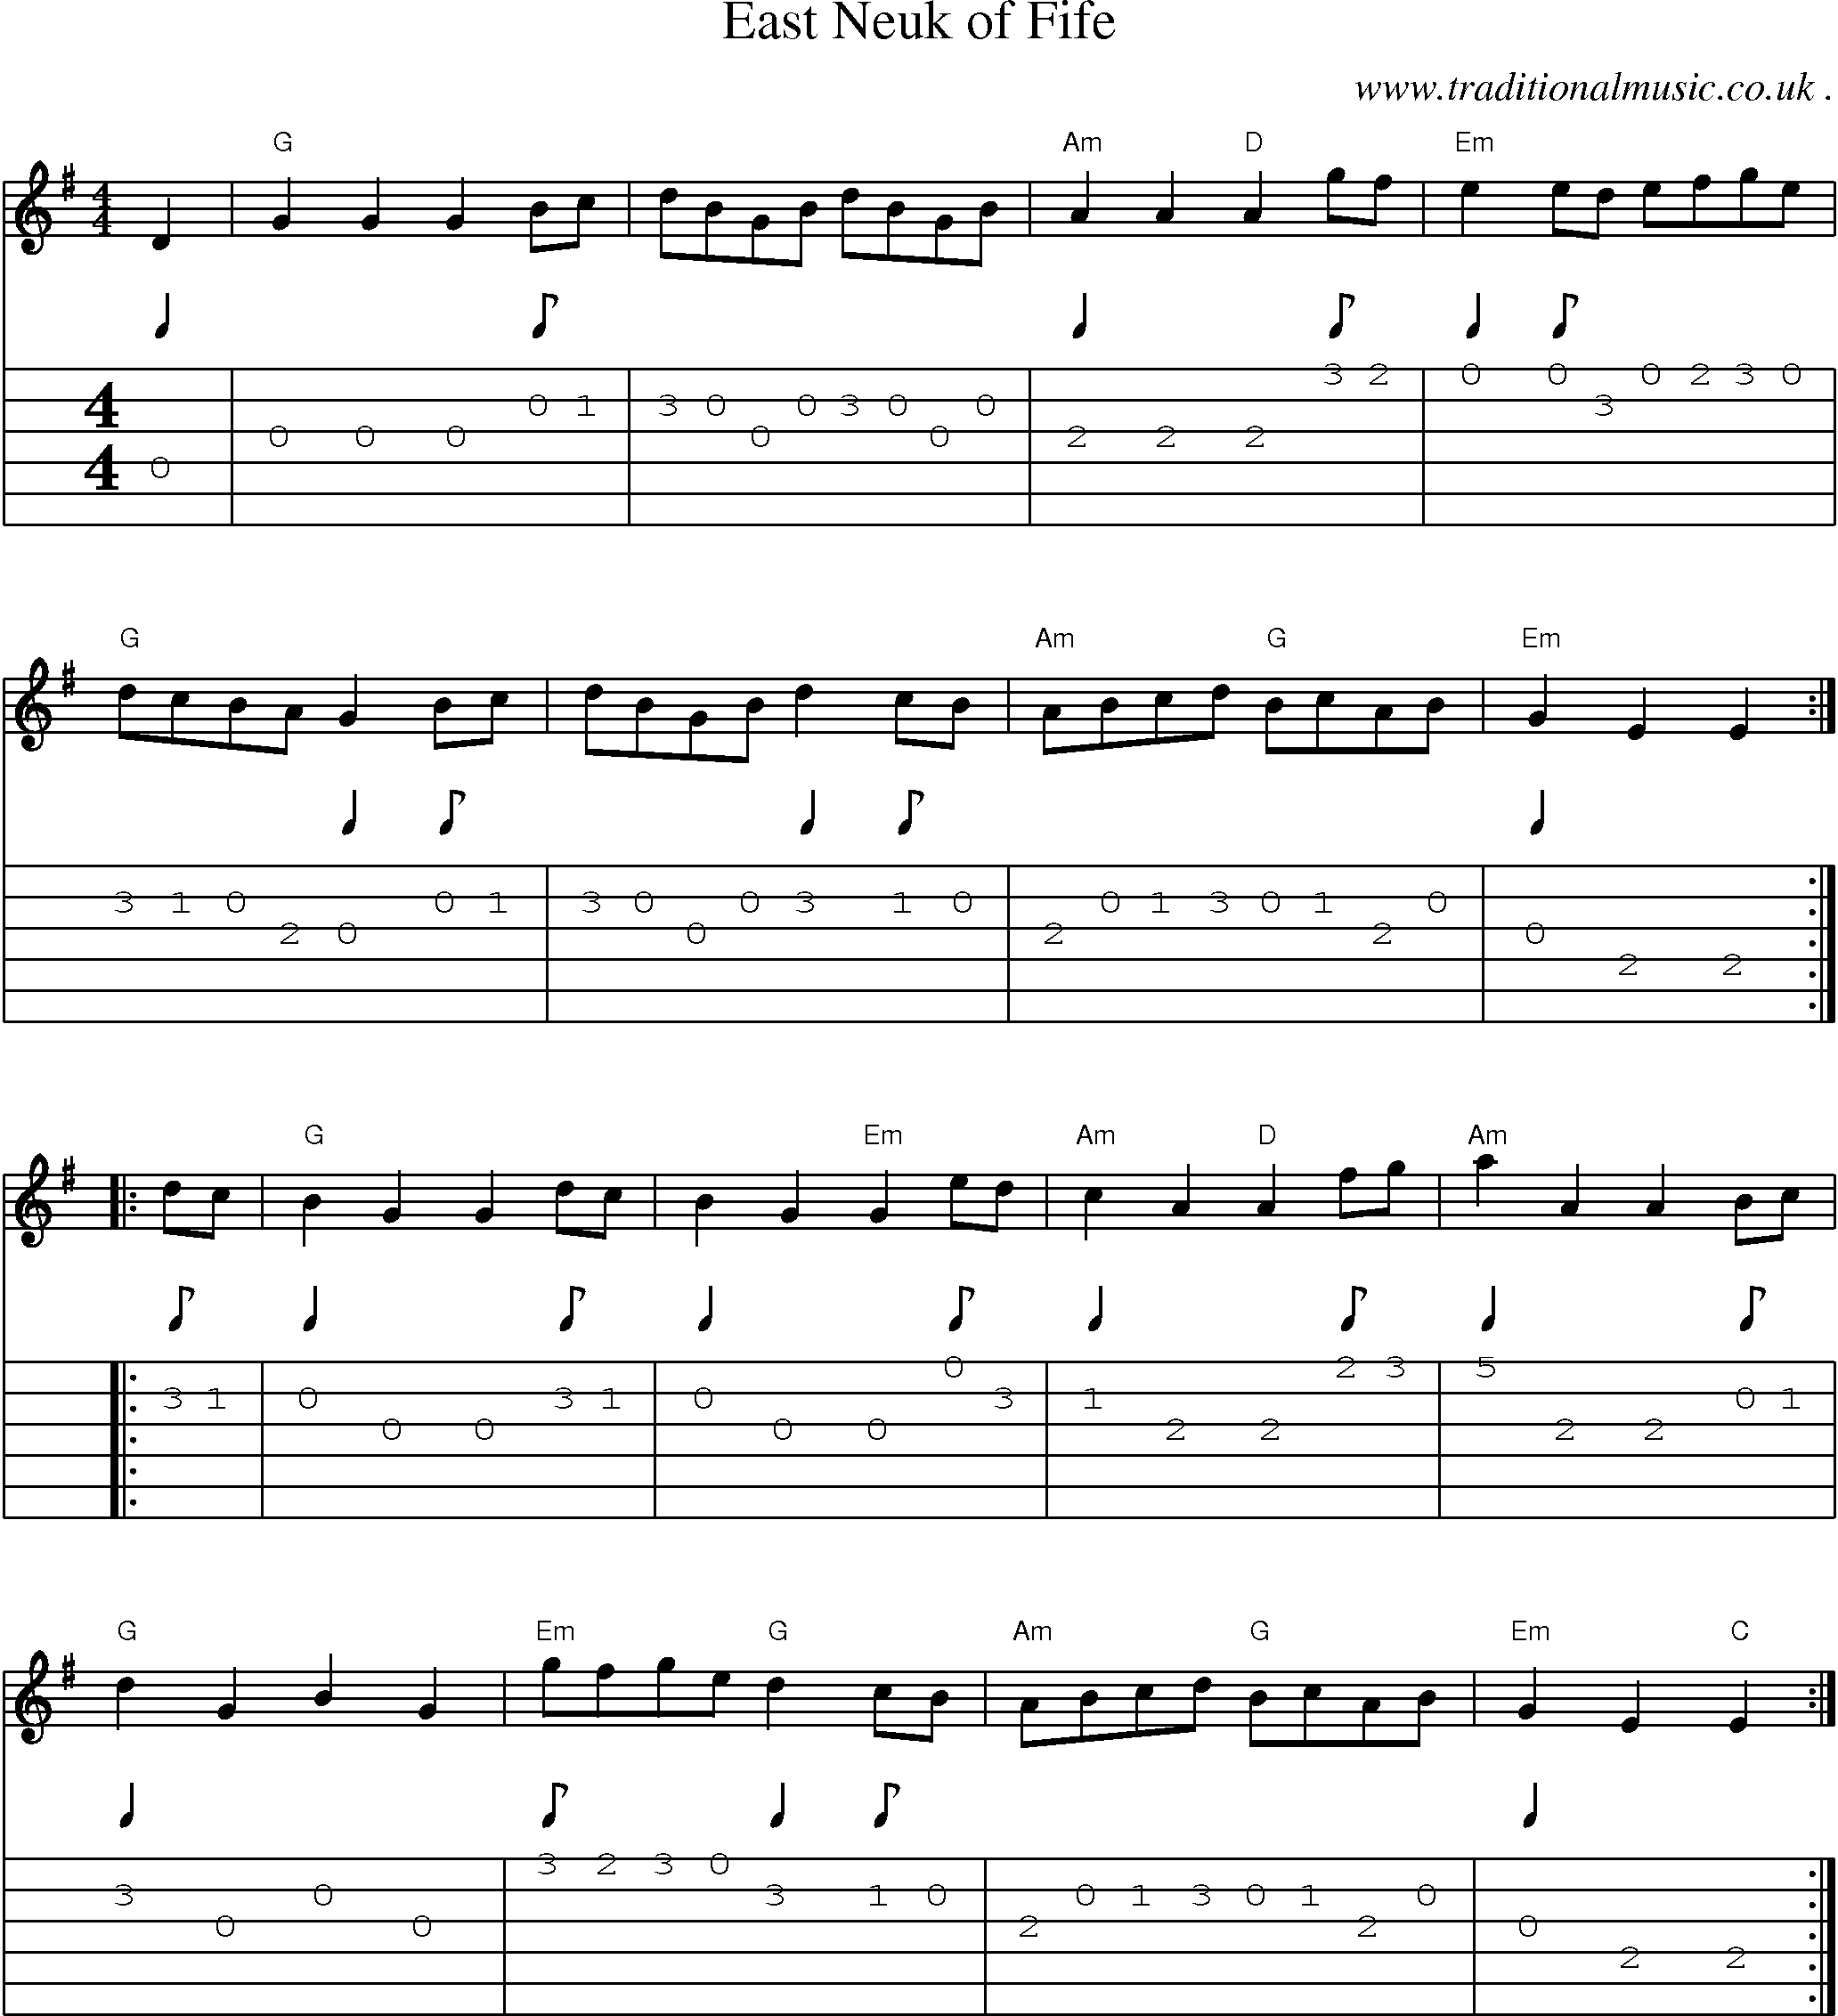 Music Score and Guitar Tabs for East Neuk of Fife